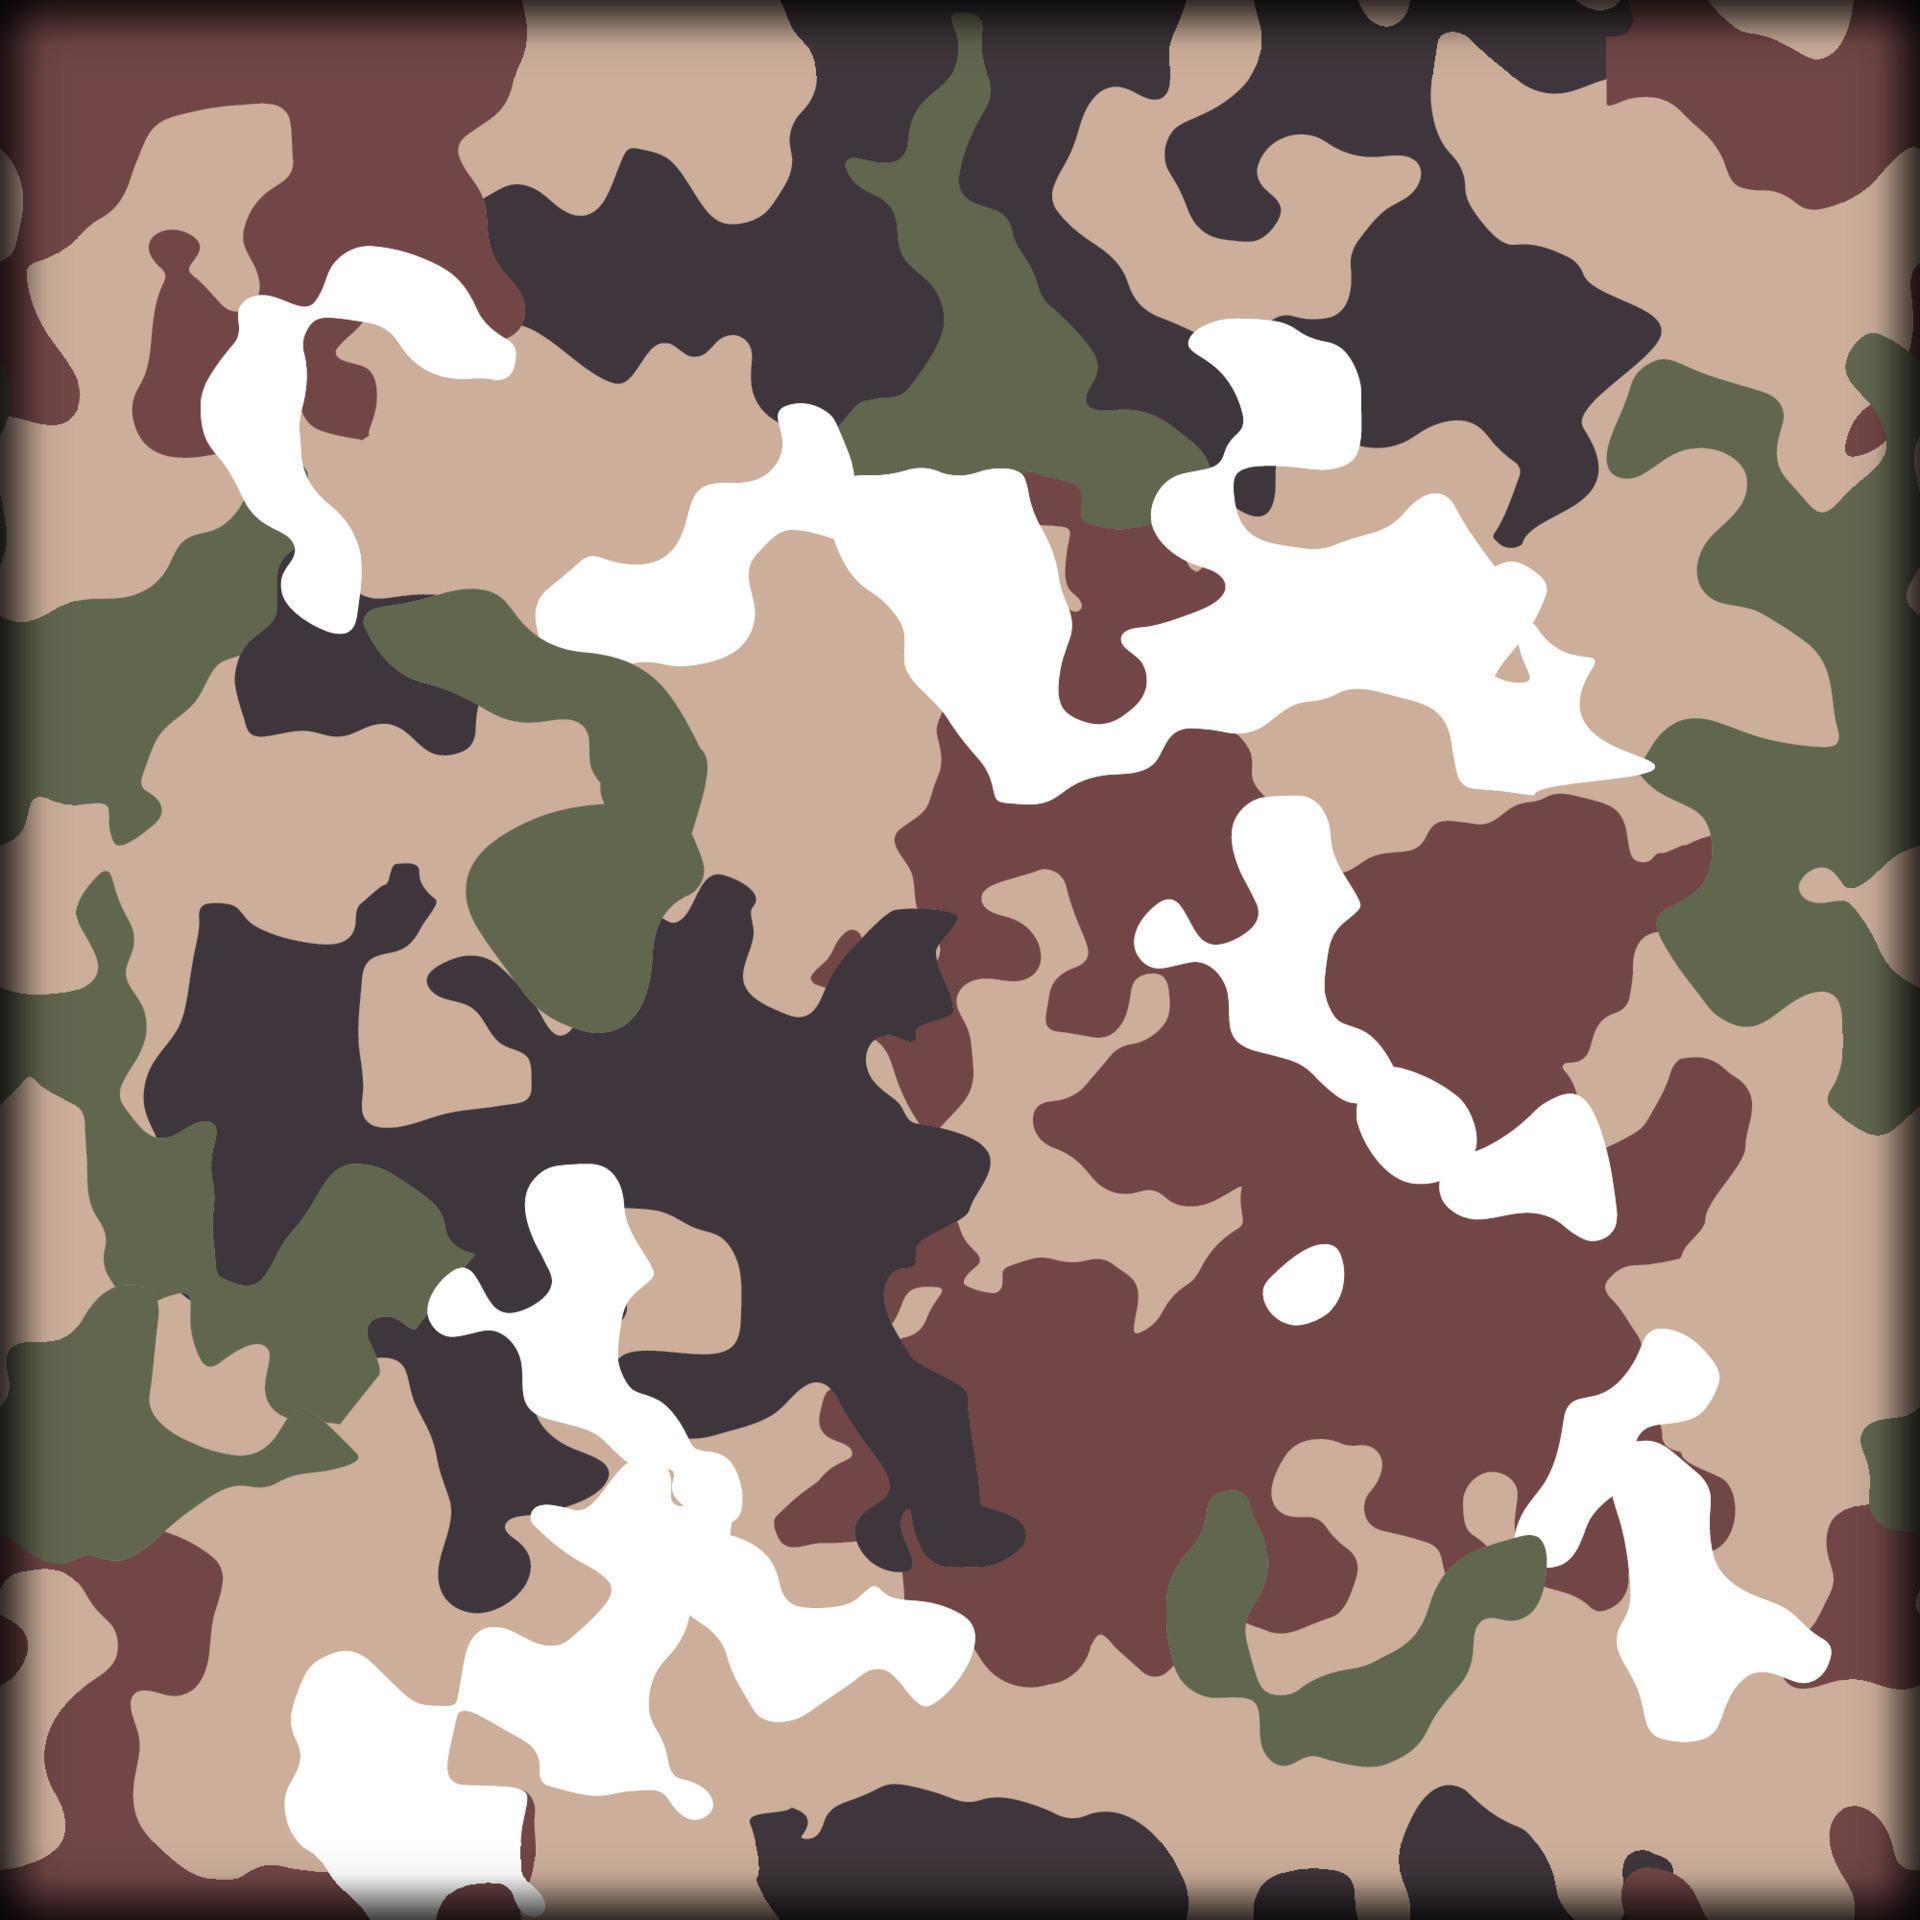 Texture of camouflage pattern vector for clothing, soldier outfits ...